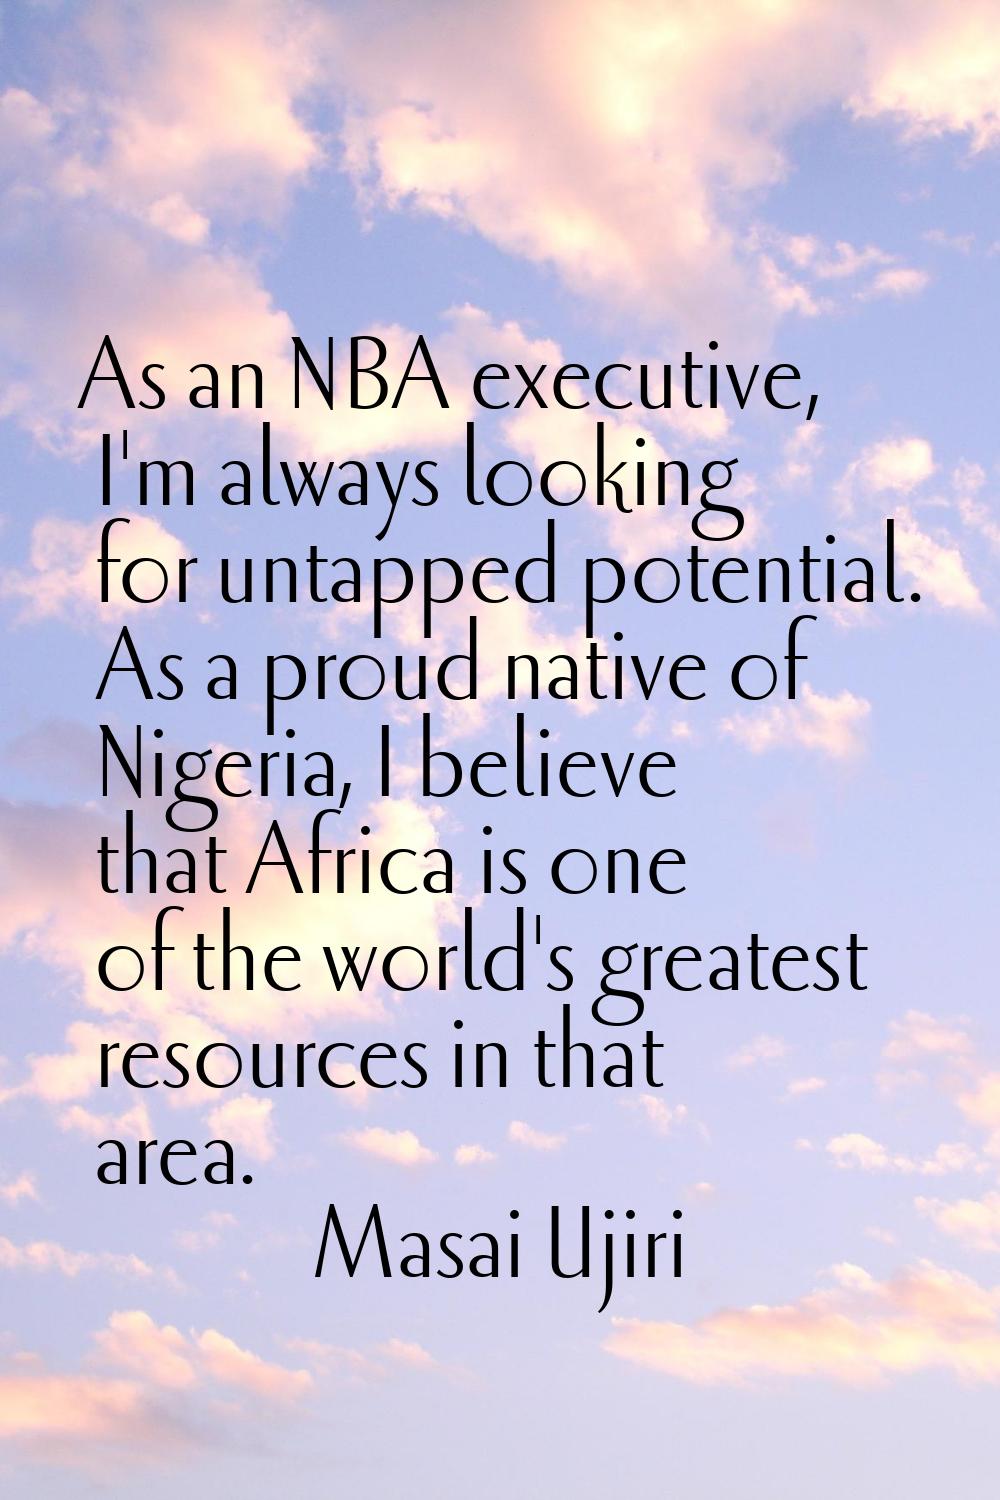 As an NBA executive, I'm always looking for untapped potential. As a proud native of Nigeria, I bel